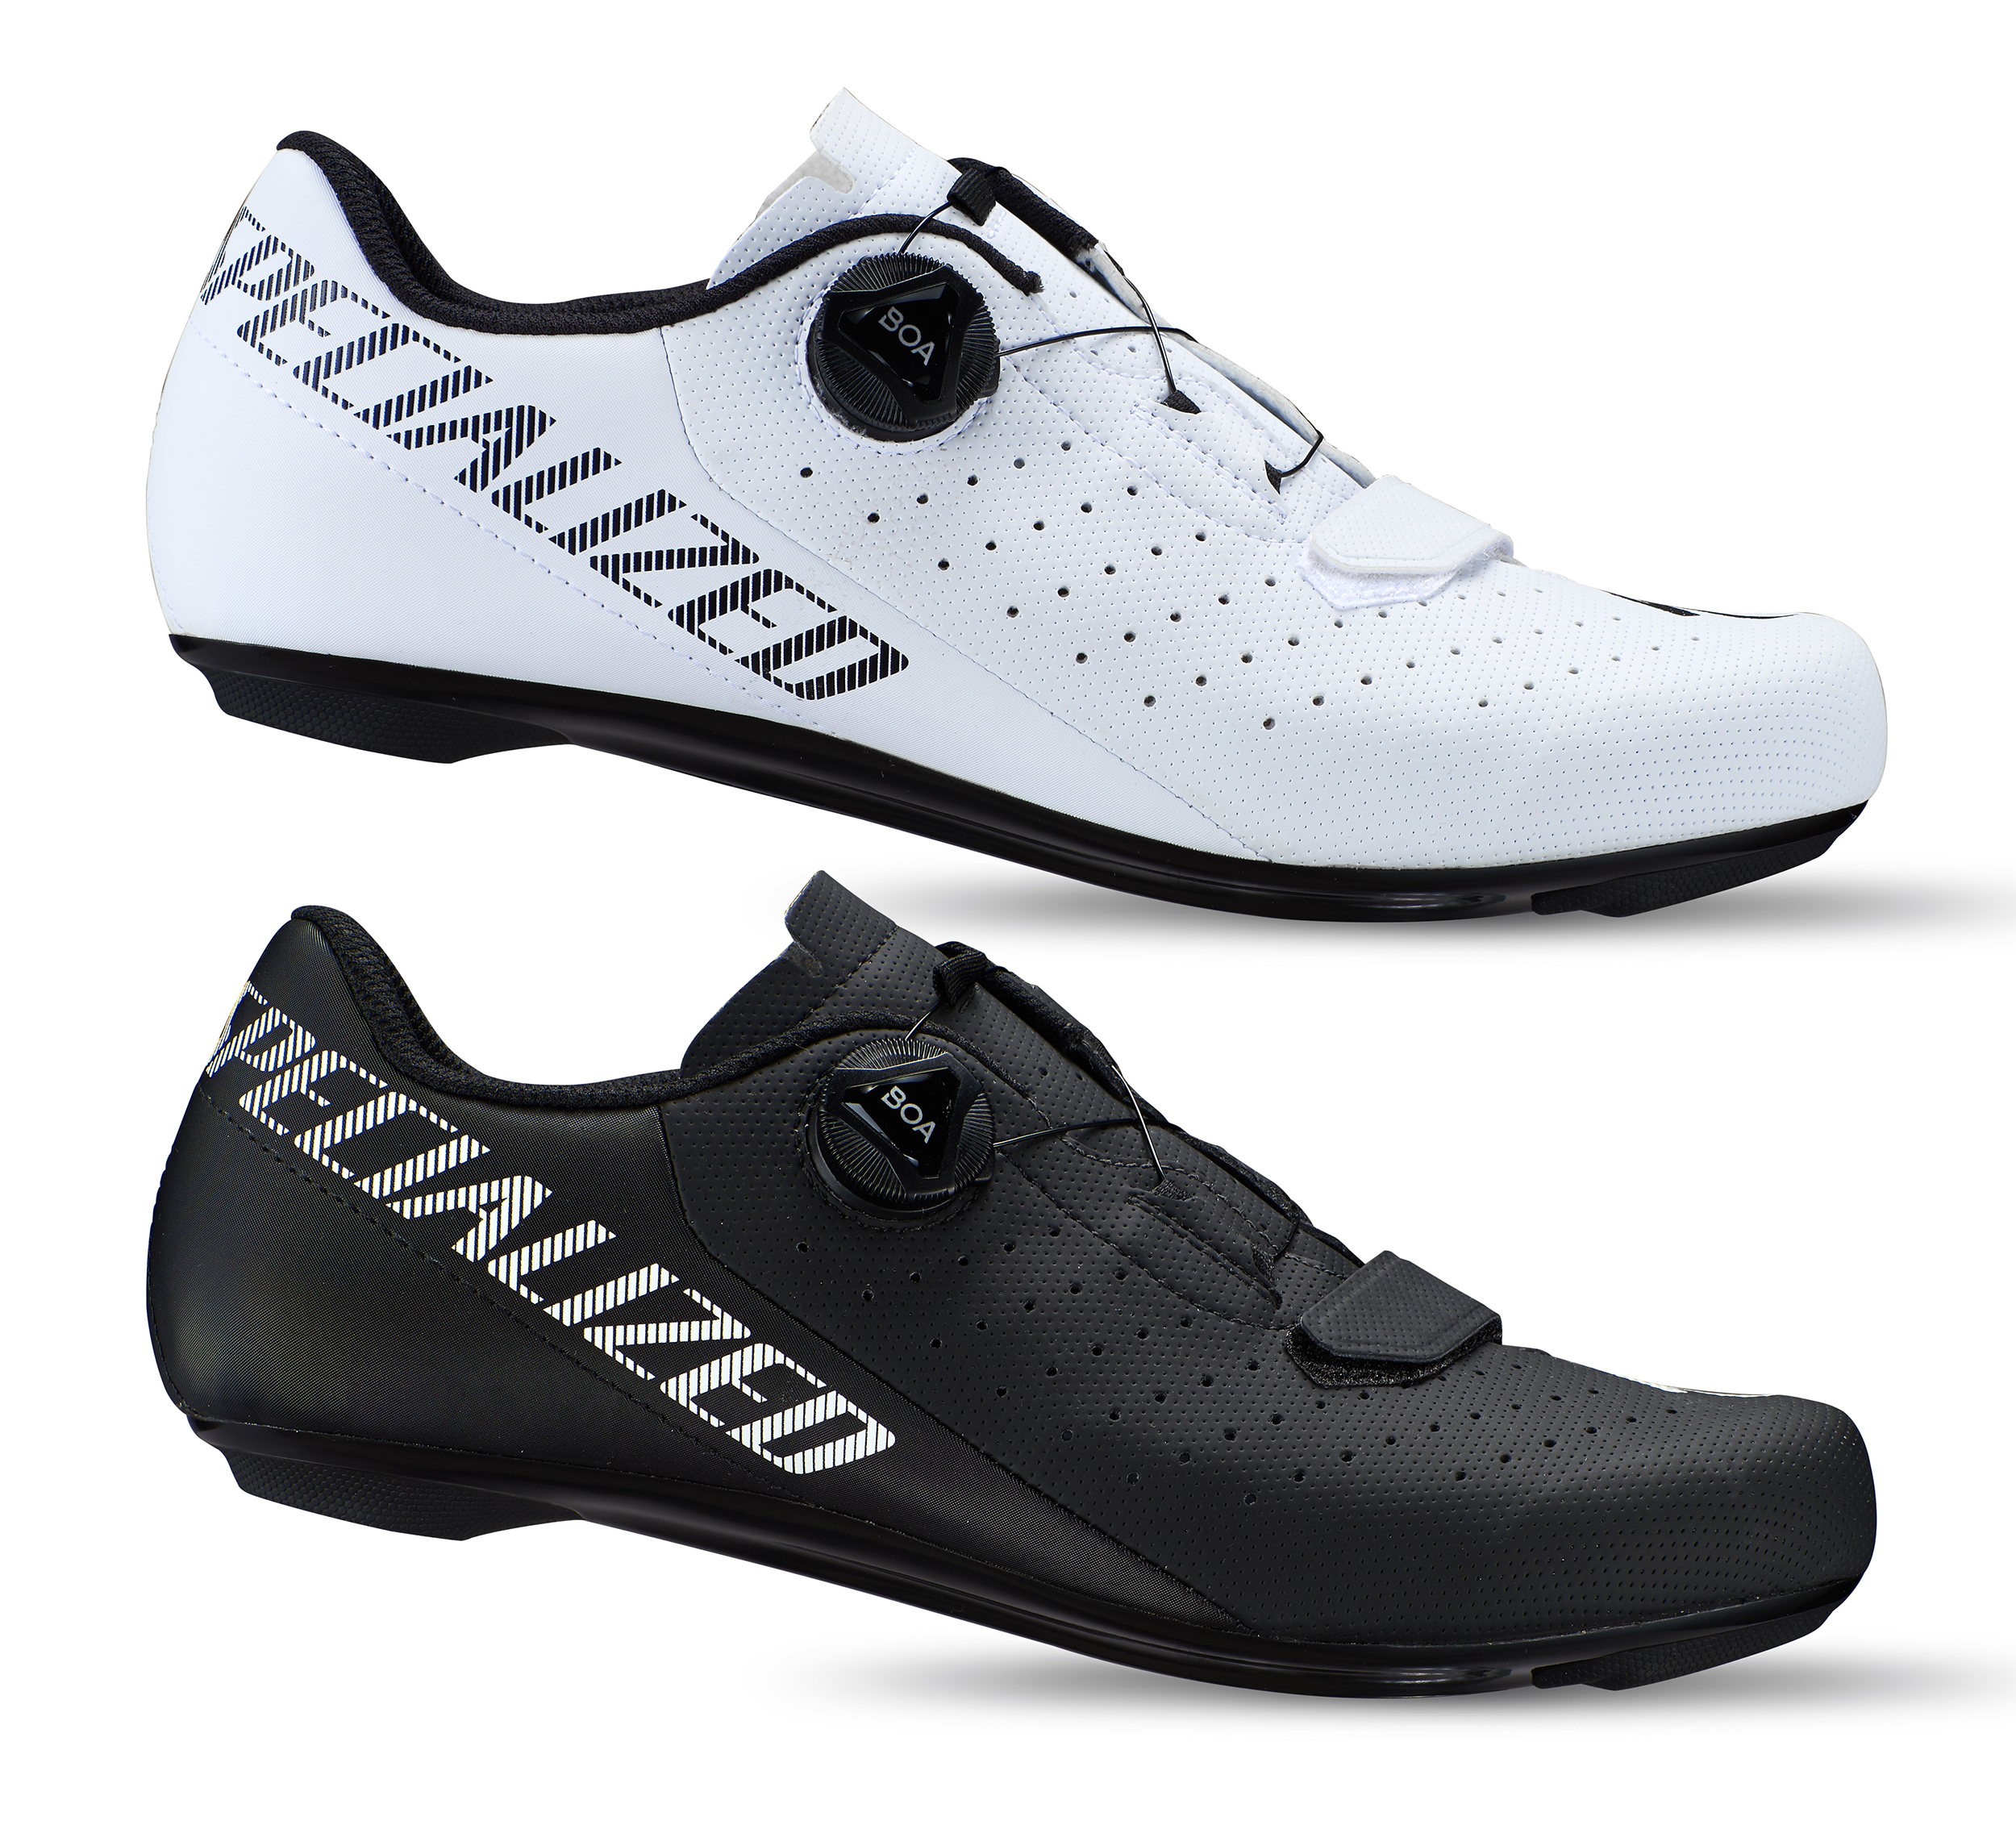 torch 1. road shoes